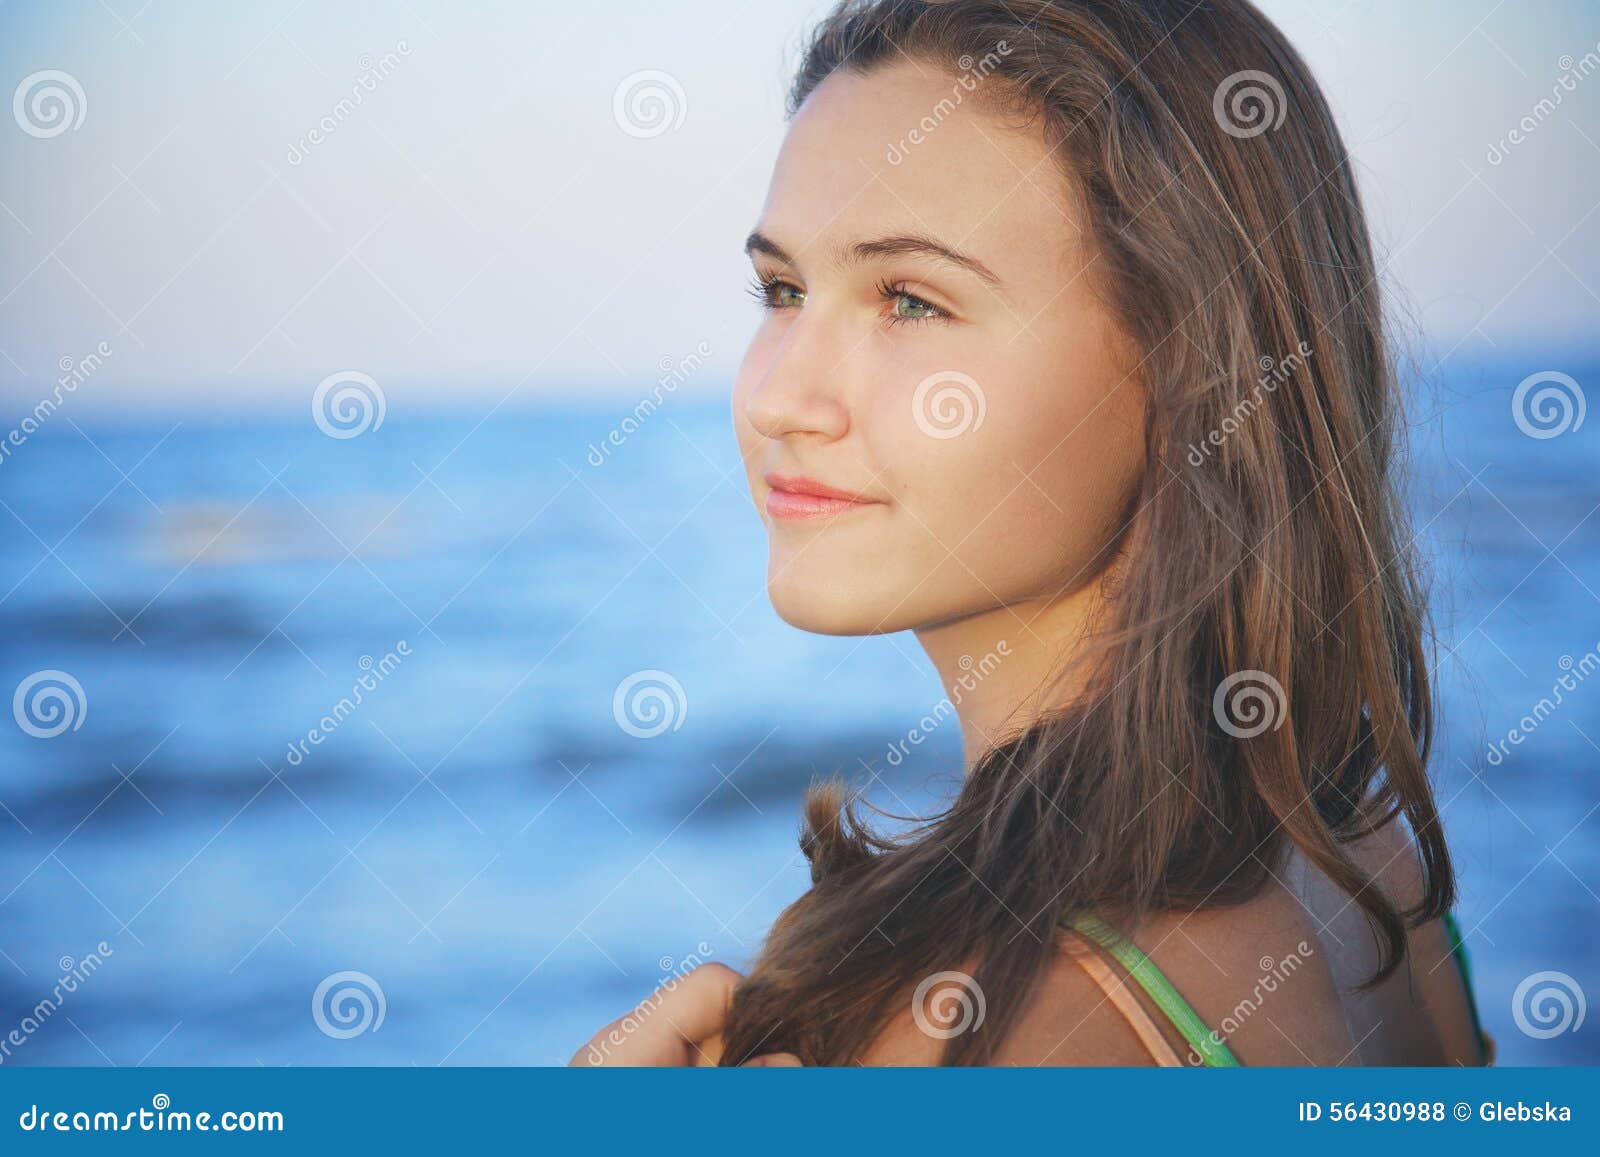 <b>...</b> teenager girl corrects long hair on beach at summer <b>evening wind</b>. - brown-haired-young-girl-beach-summer-evening-romantic-teenager-corrects-long-hair-wind-56430988